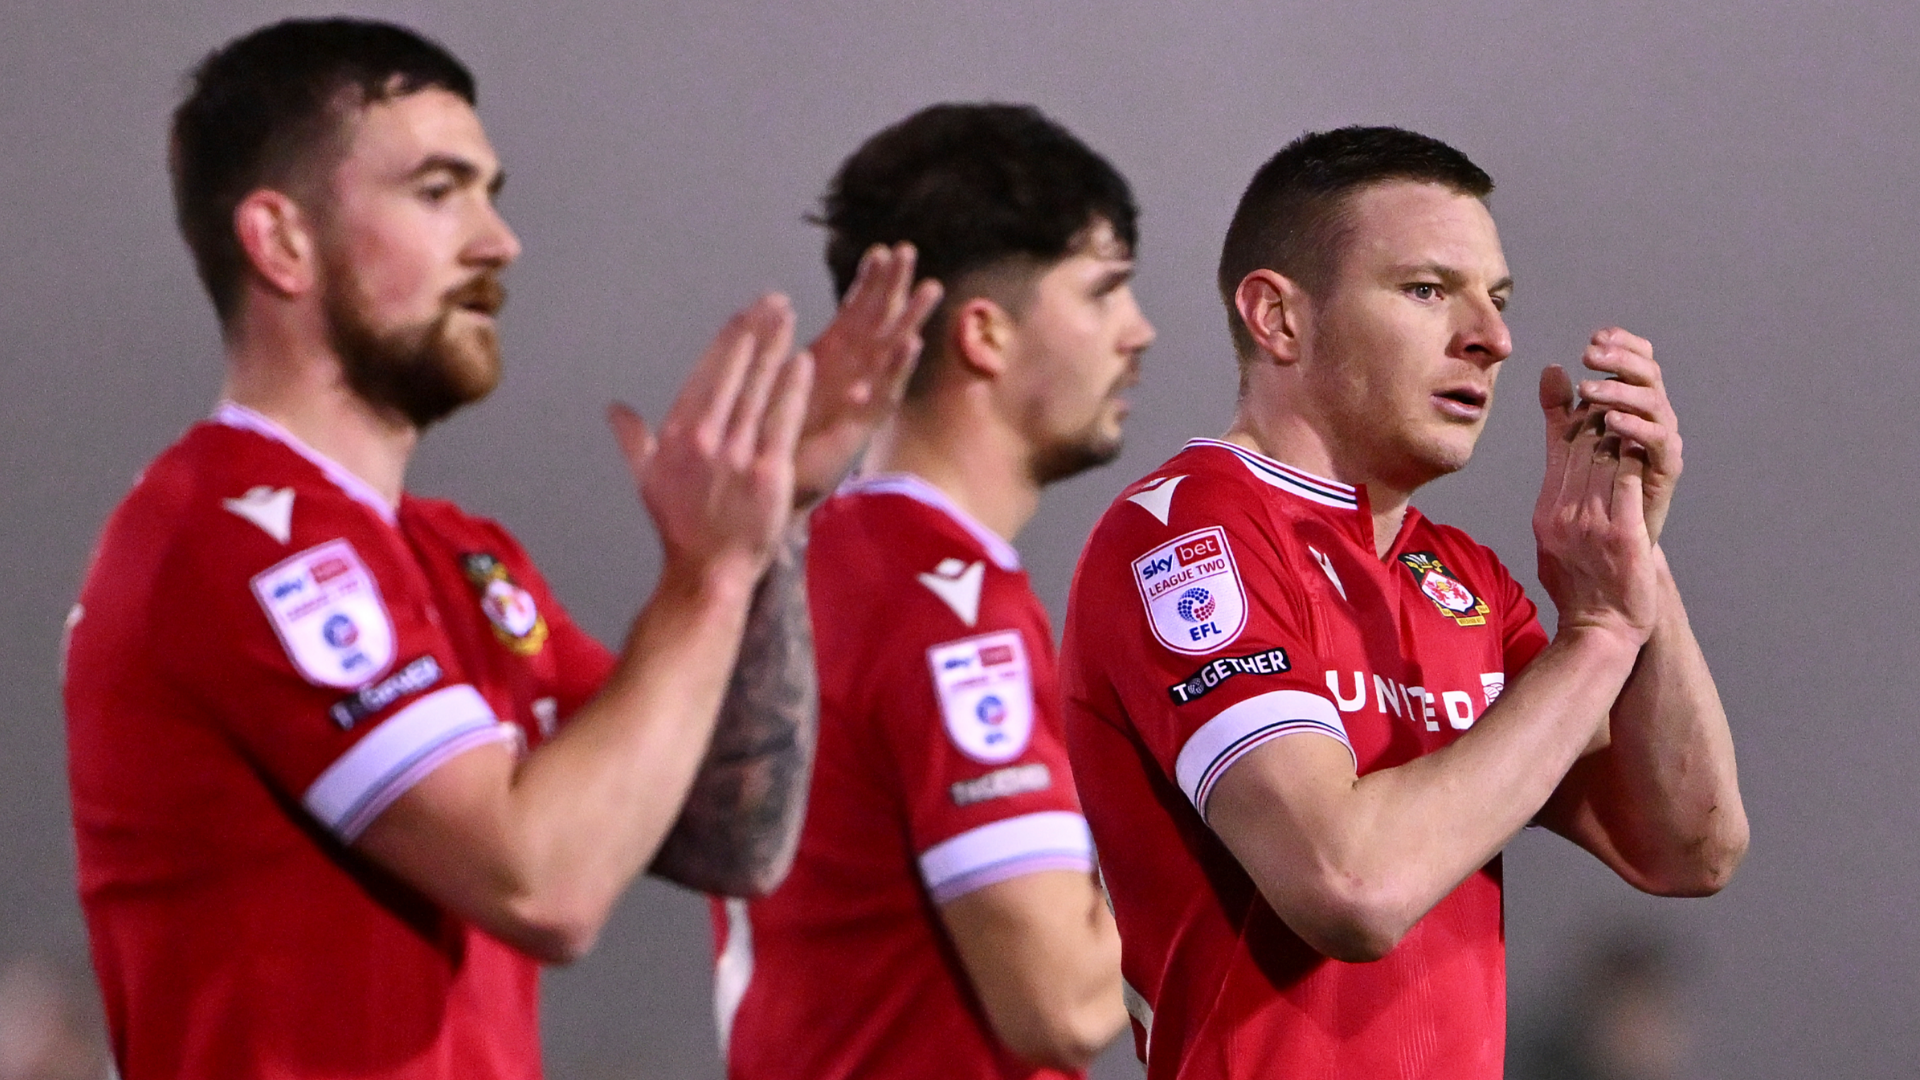 Revealed: Wrexham ‘fighting between themselves’ in promotion bid – with Ryan Reynolds & Rob McElhenney not the only ones feeling the pressure